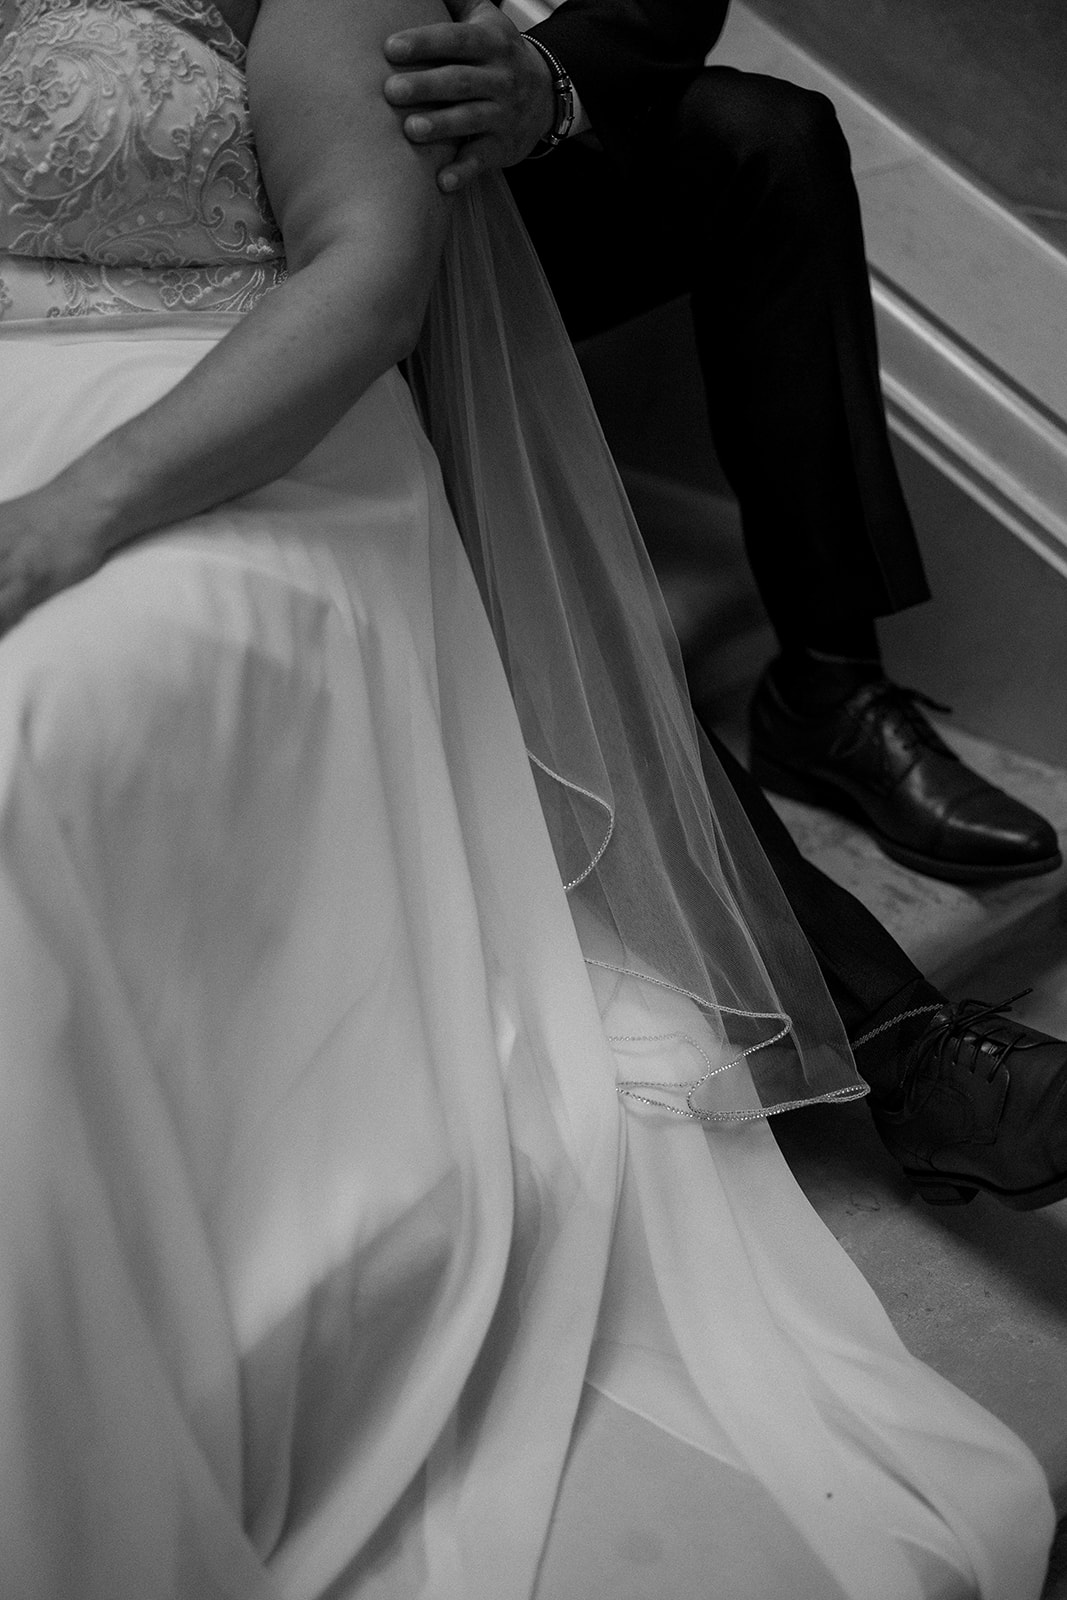 bride and groom embrace in capitol building during their intimate elopement day